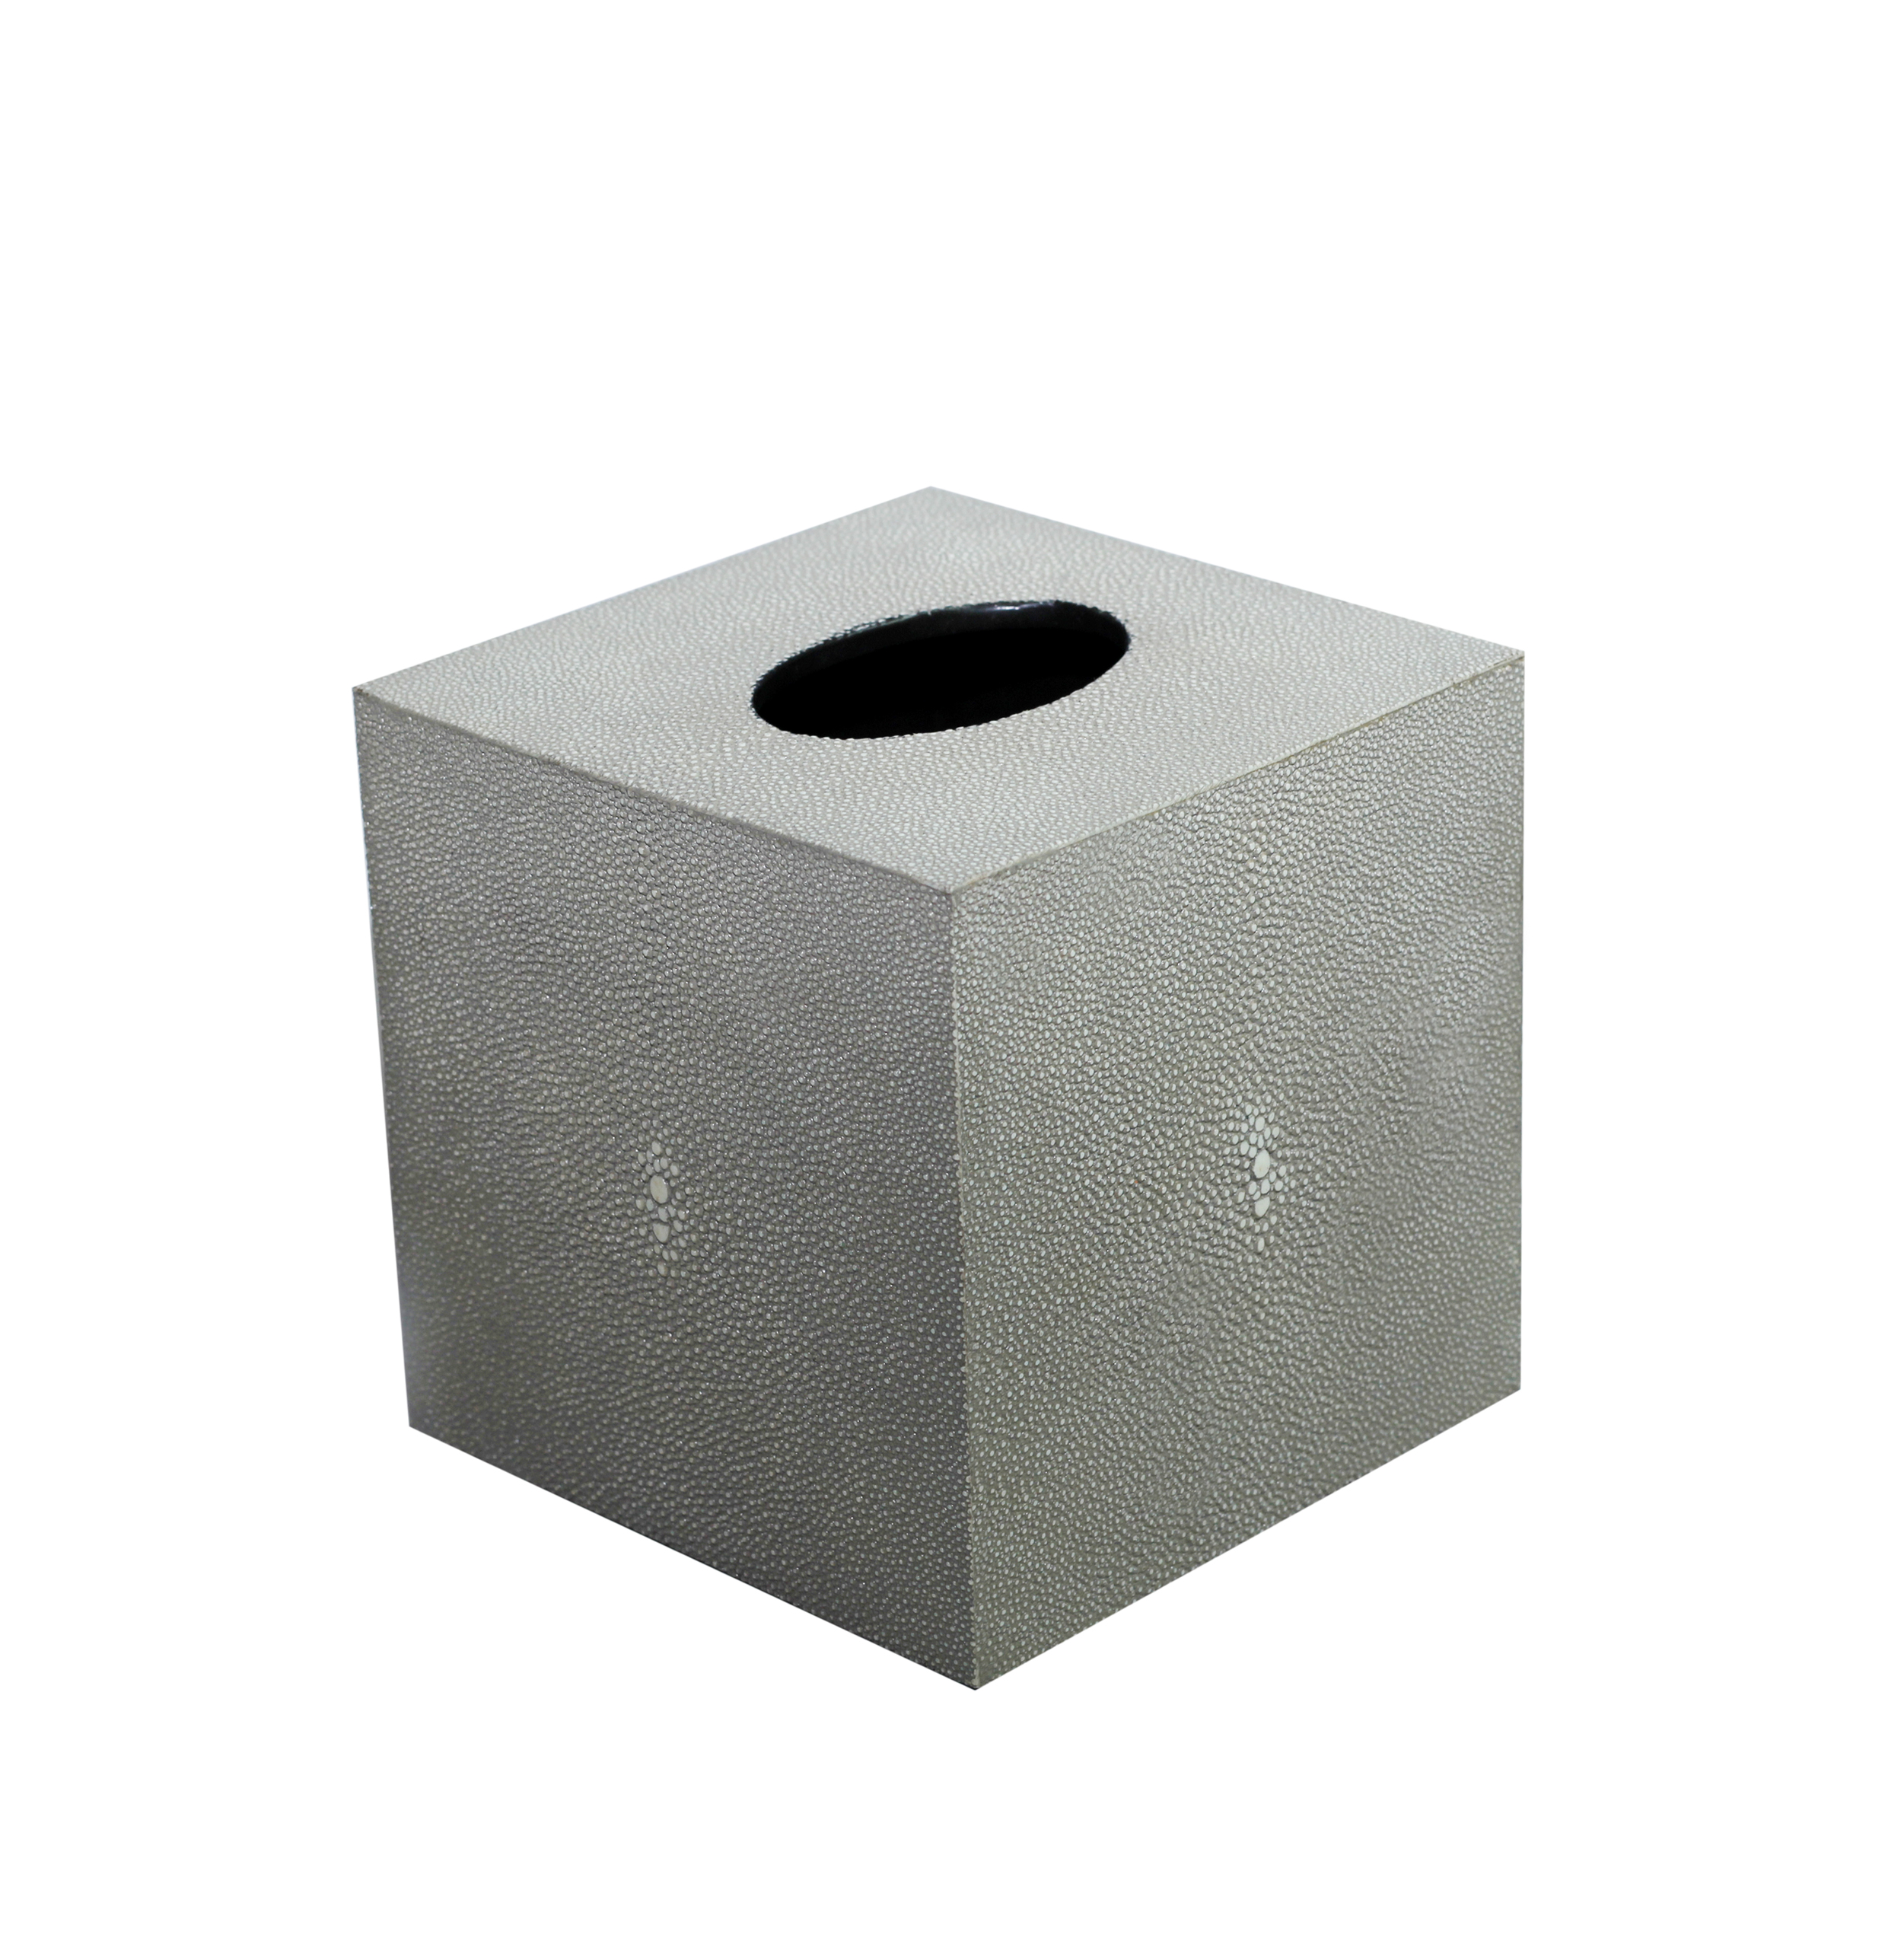 Square Faux Shagreen Tissue Box in Taupe color